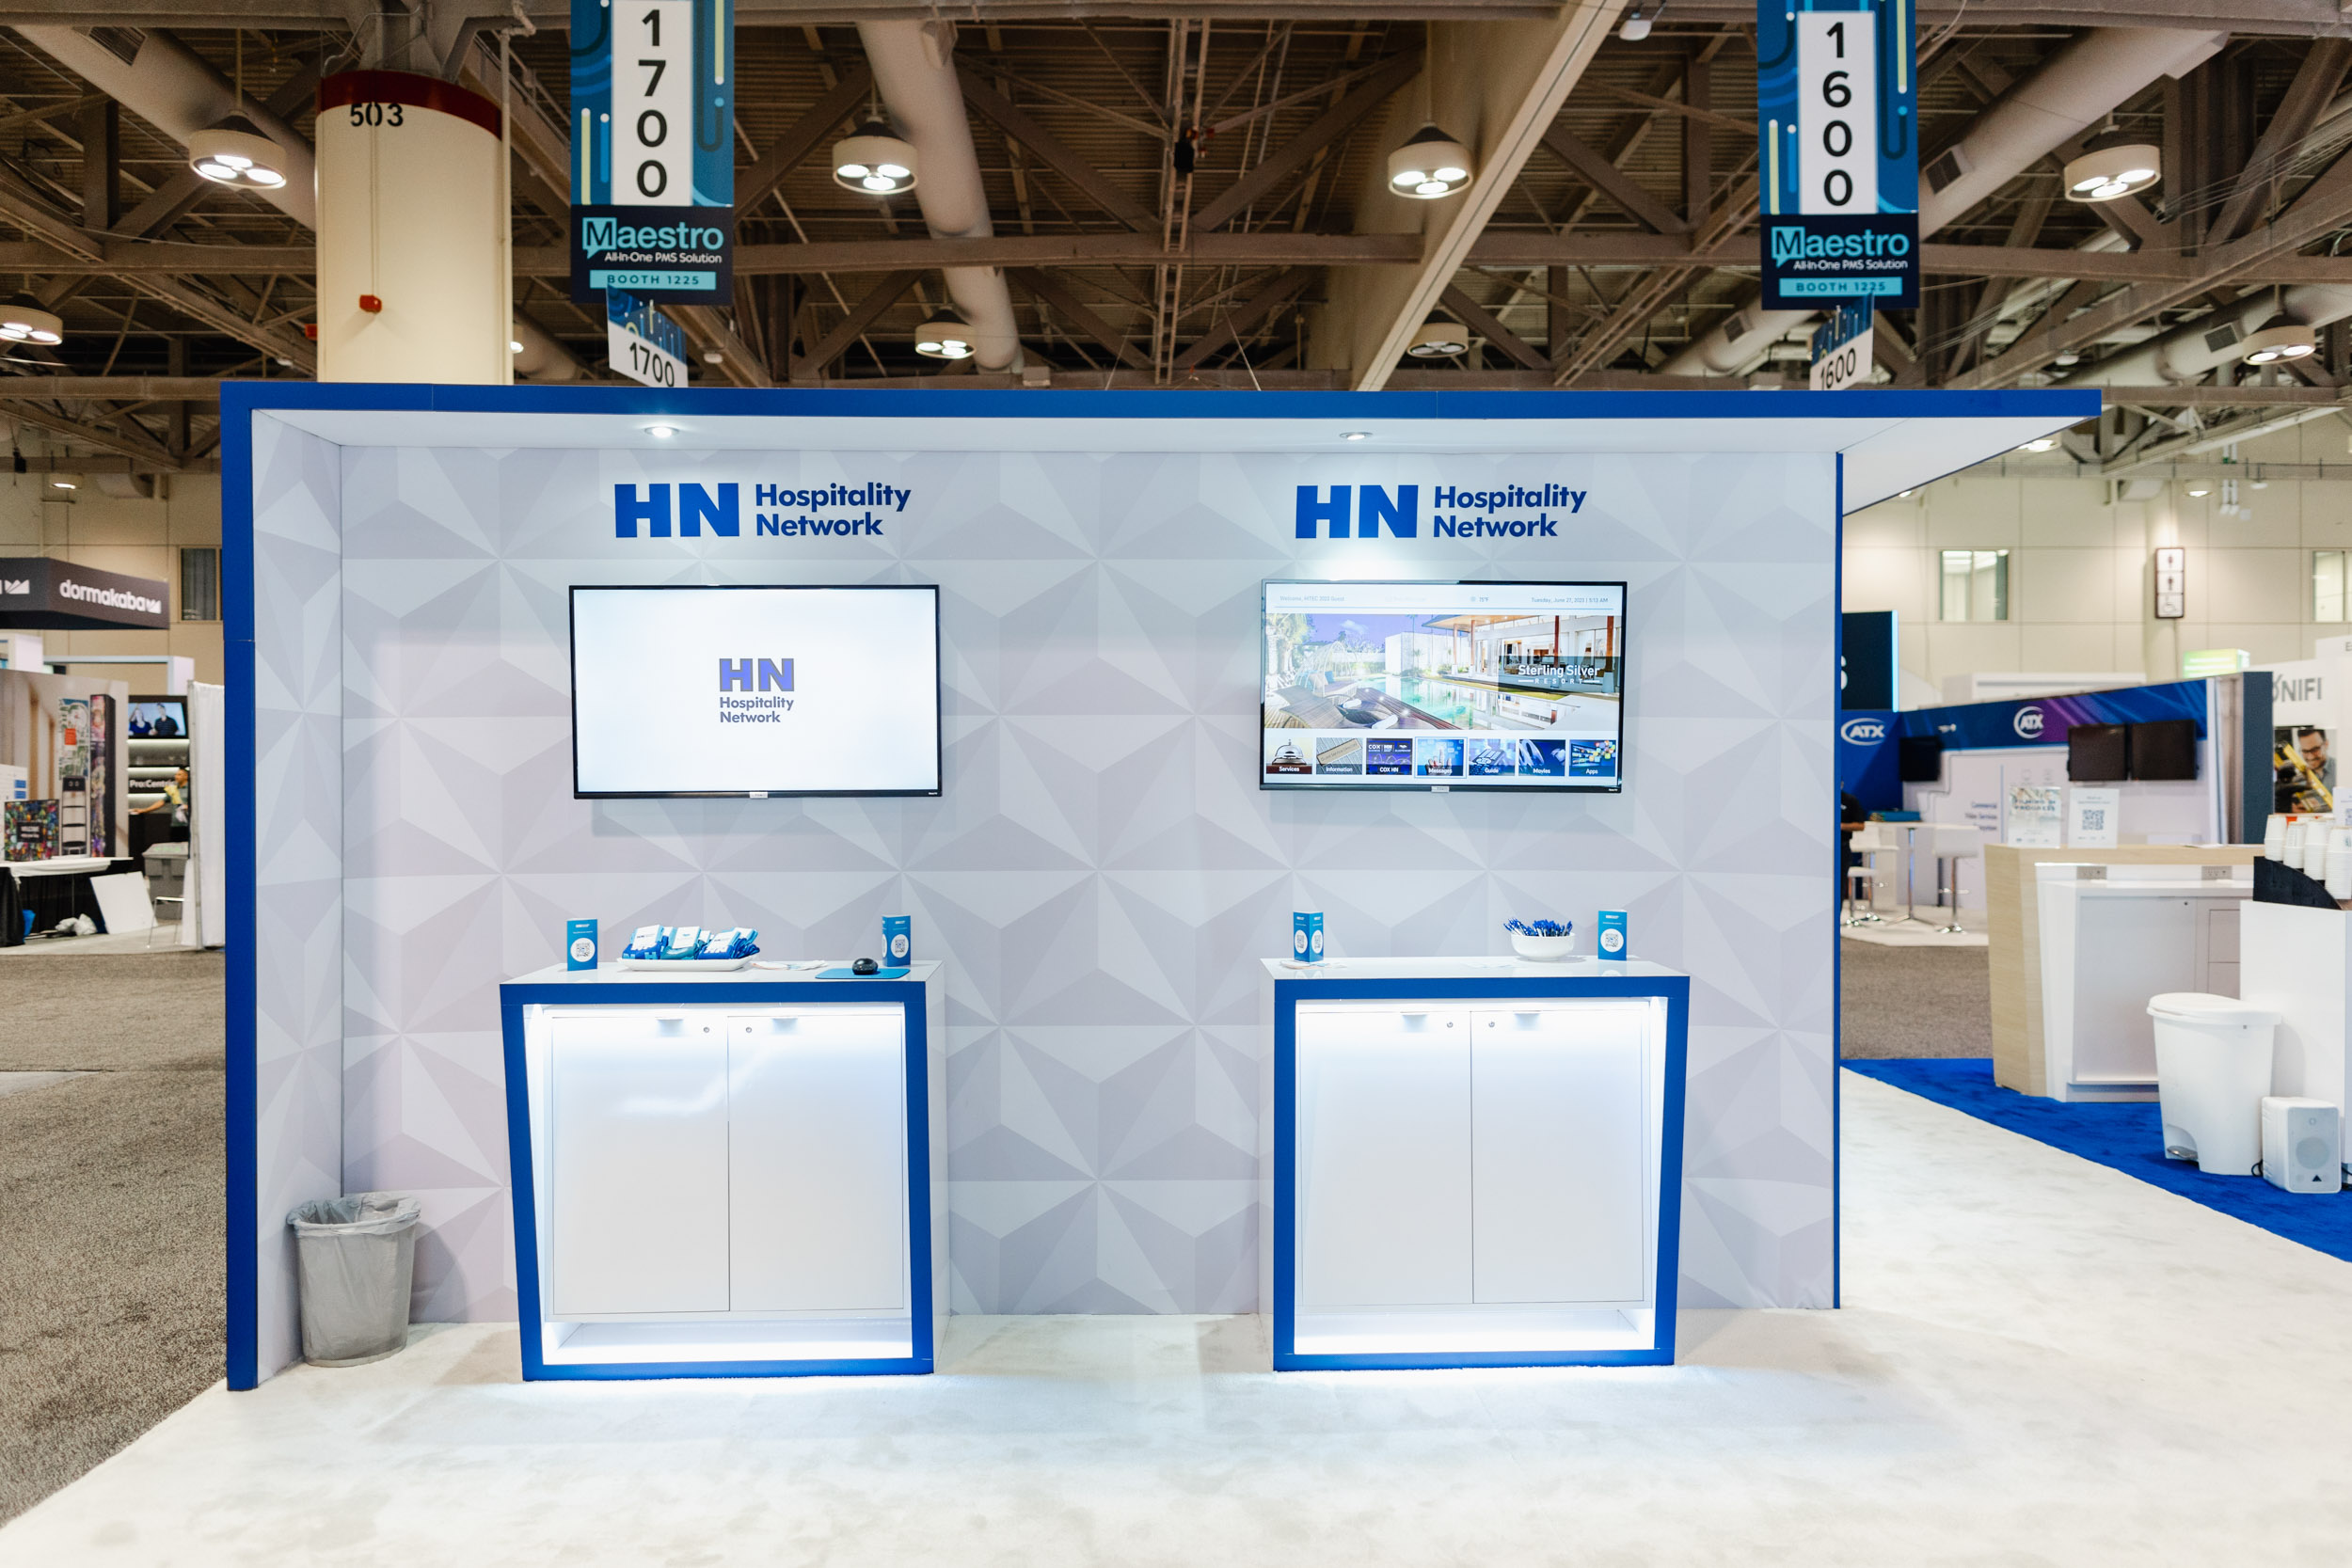 A Toronto trade show booth featuring a blue and white color scheme.